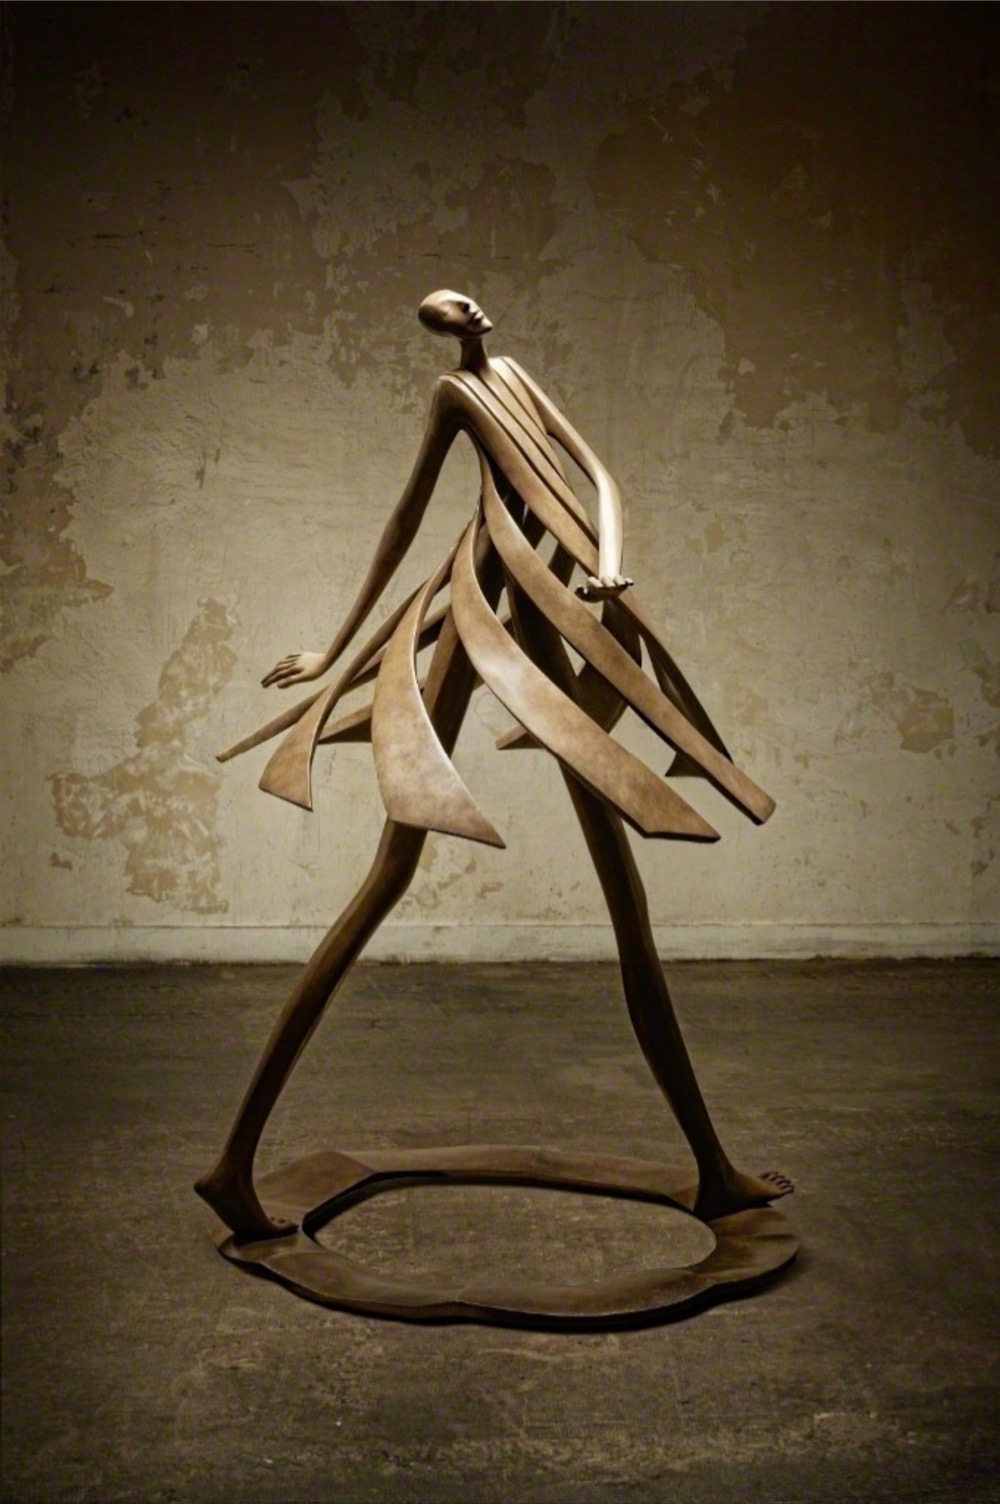 sculpture of a woman walking, her dress flaring out